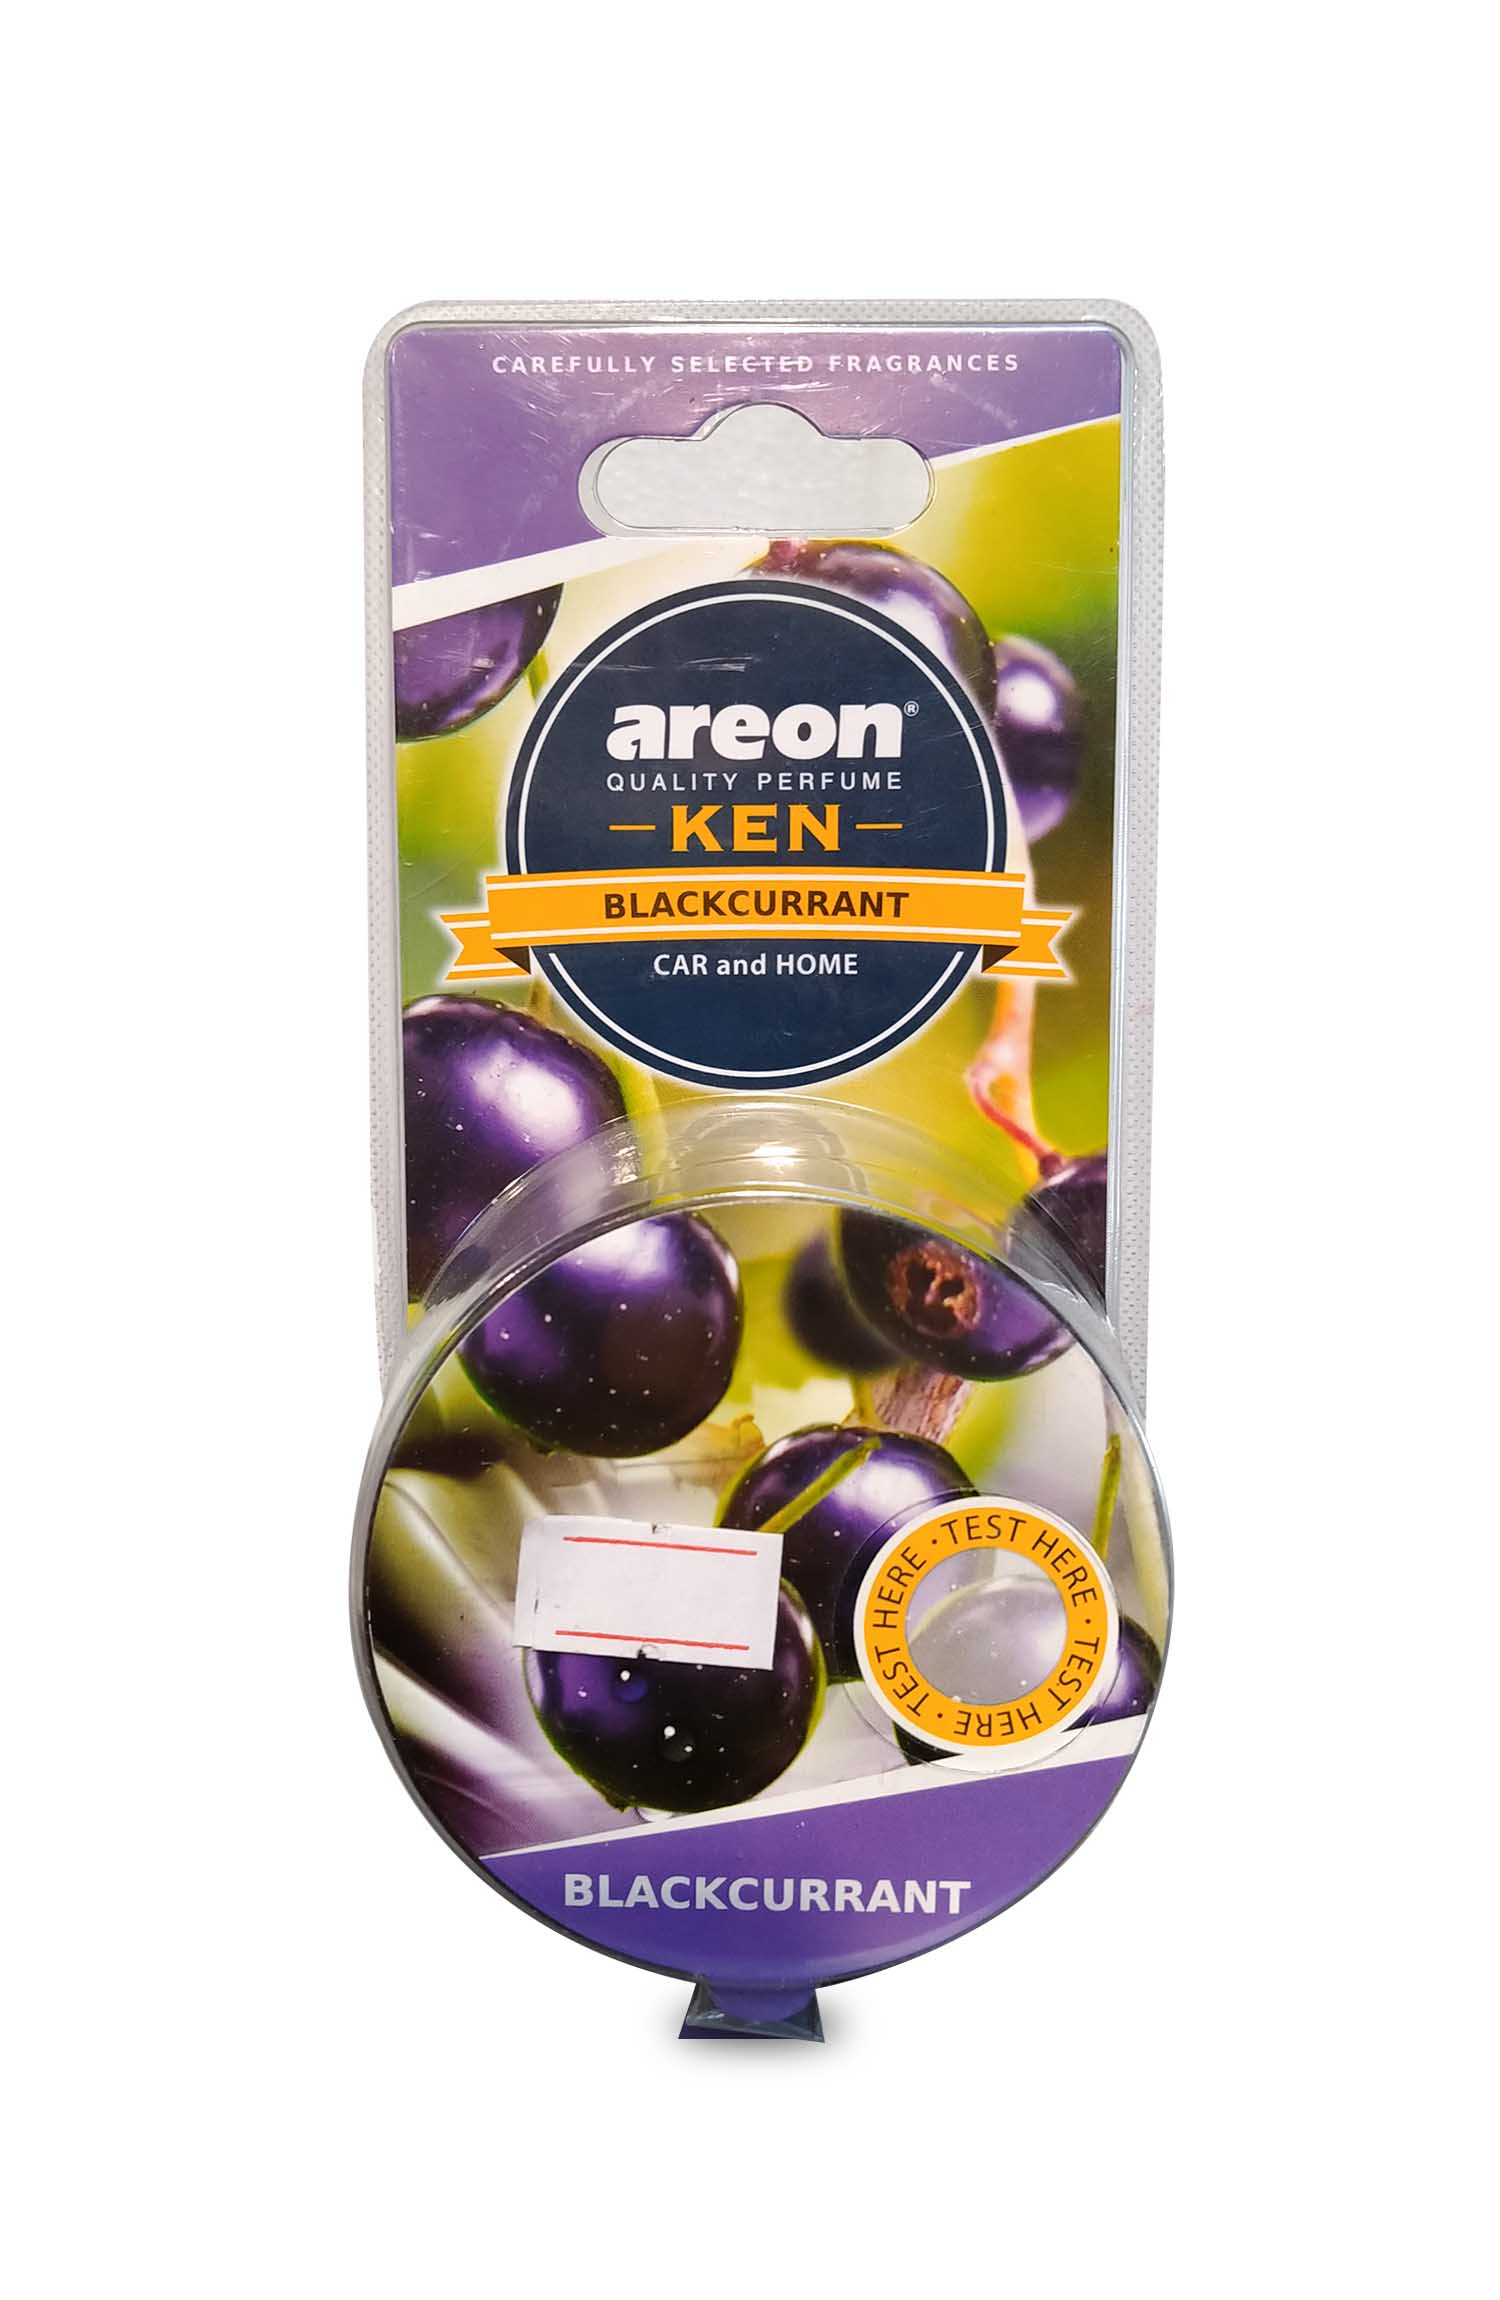  black currant recipes Areon Ken Car Scent Air freshener Blister Areon Ken Black Current Car Perfume Fragrance Air Freshener Buy Areon Ken Wood Black Current Perfume & Fragrance